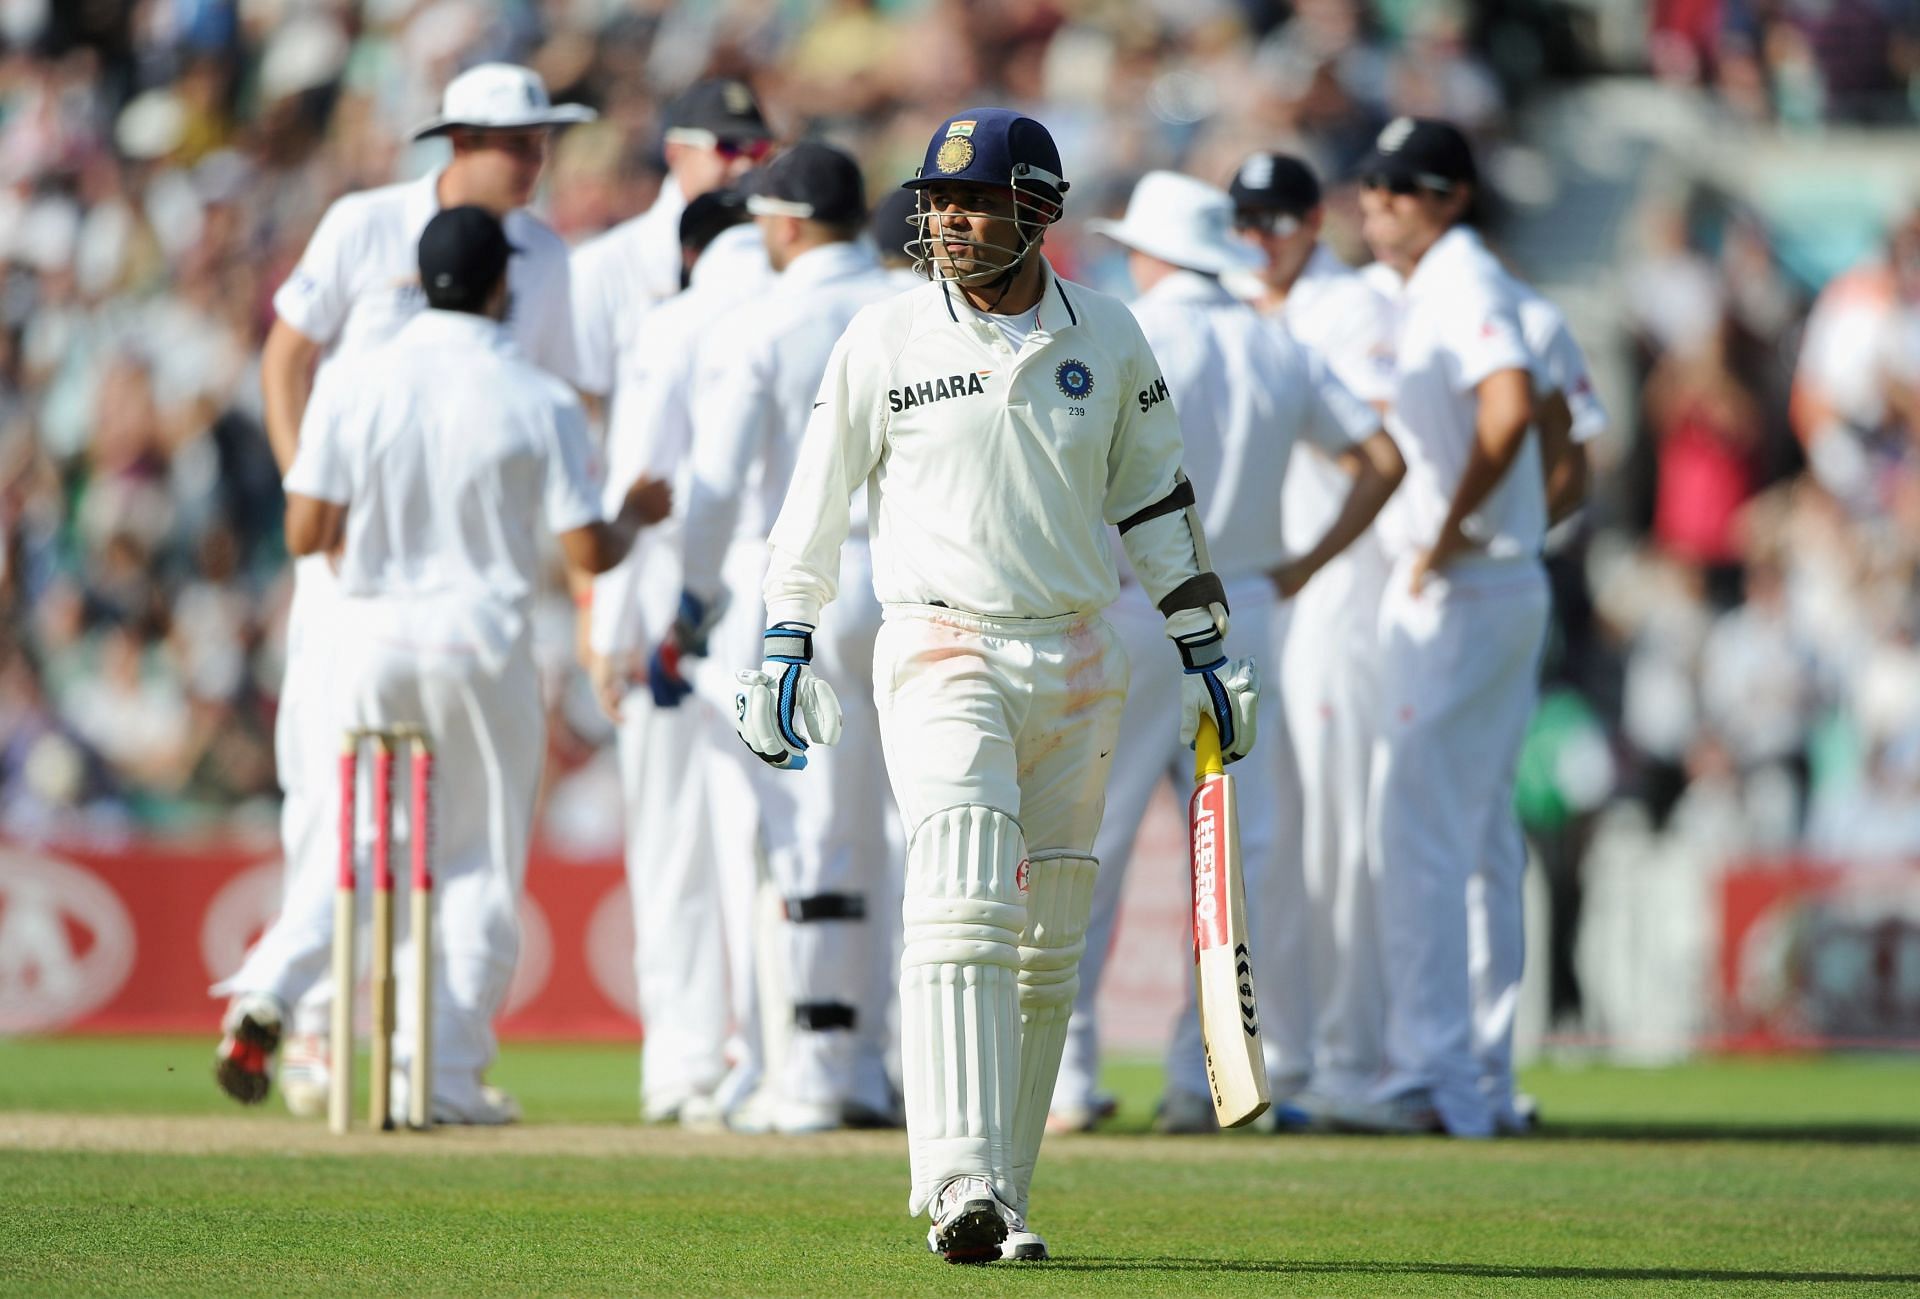 Virender Sehwag played 103 Test matches for Team India